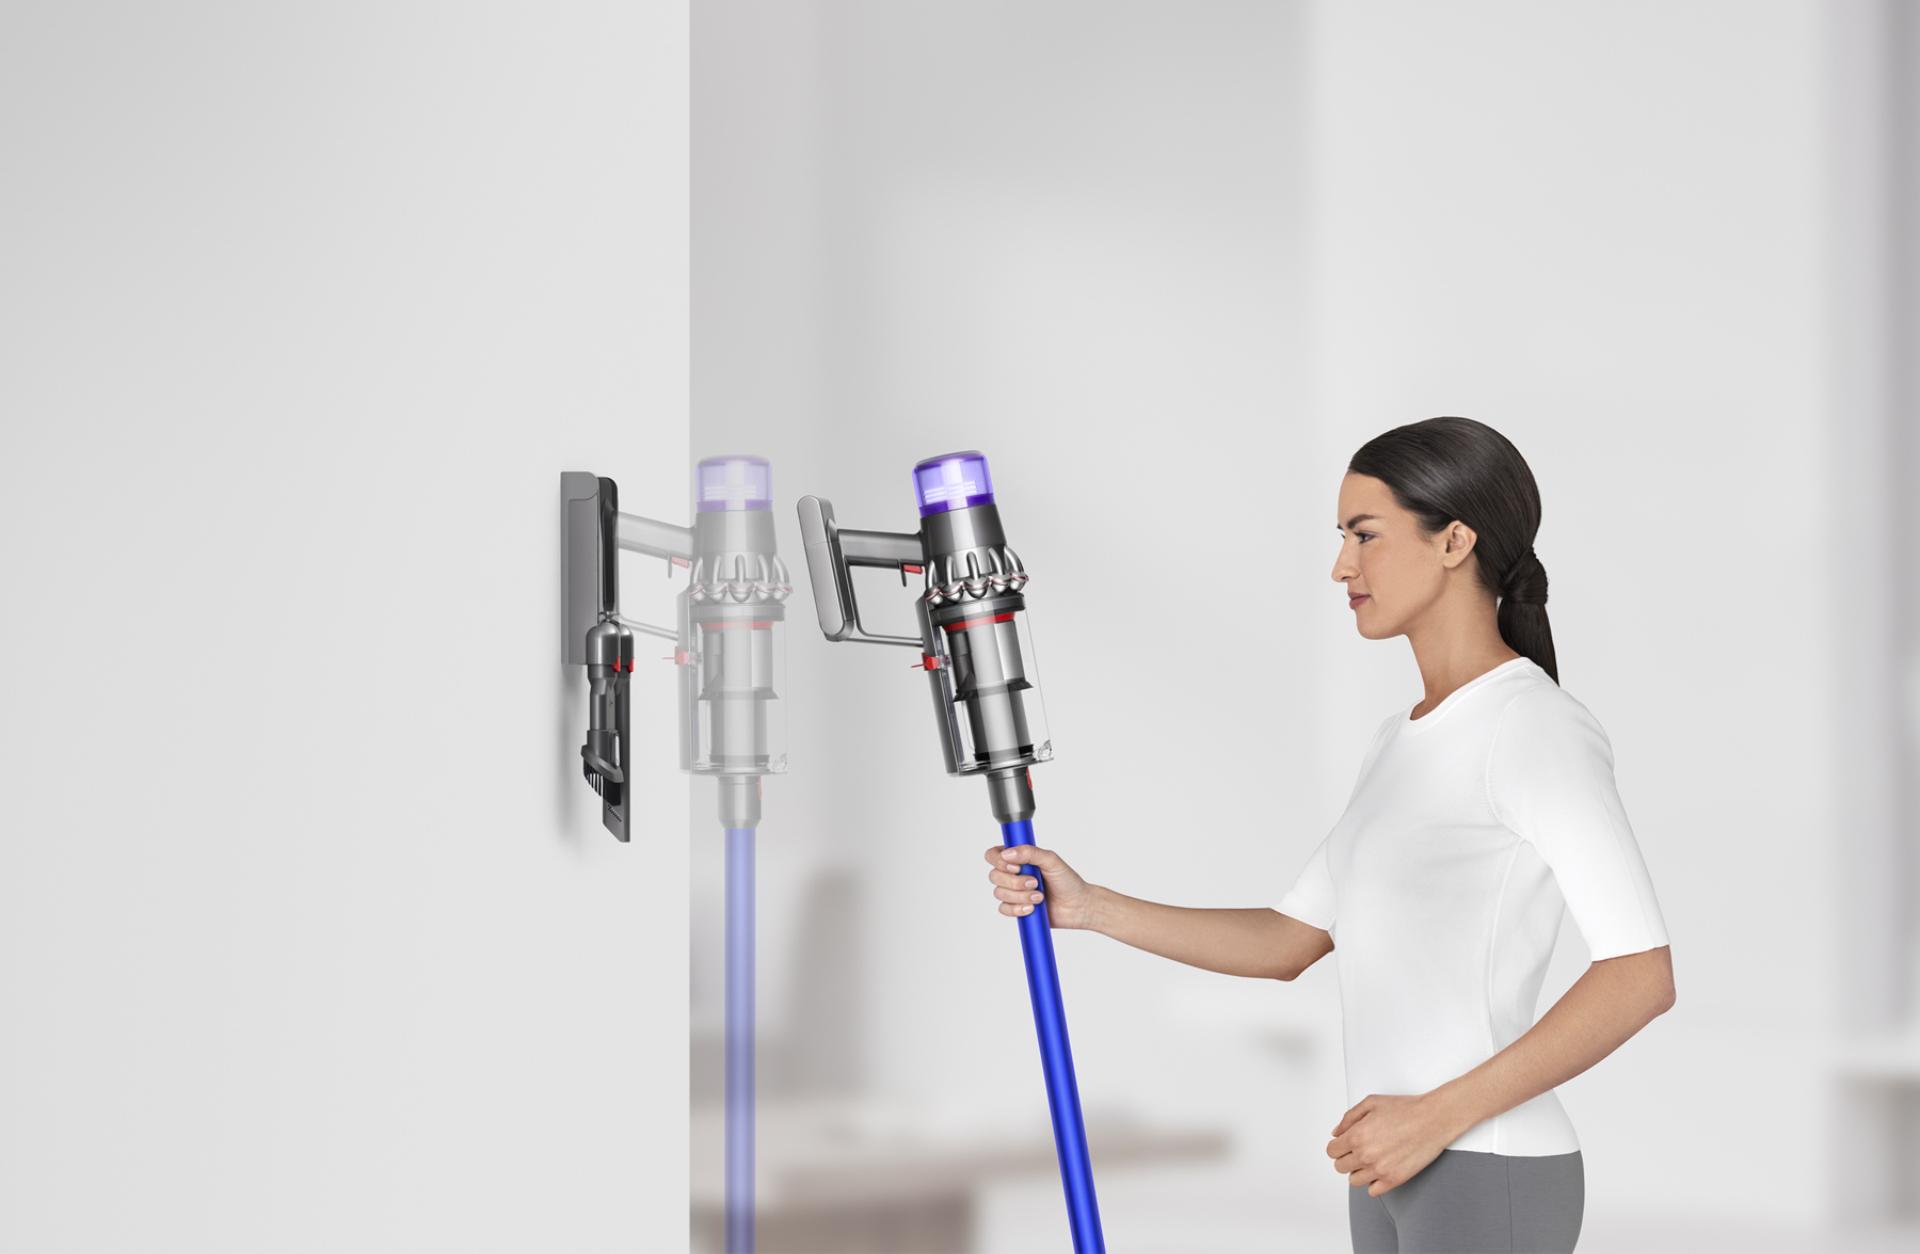 Dyson cordless pet vacuum with the Mini motorized tool attached directly to the machine